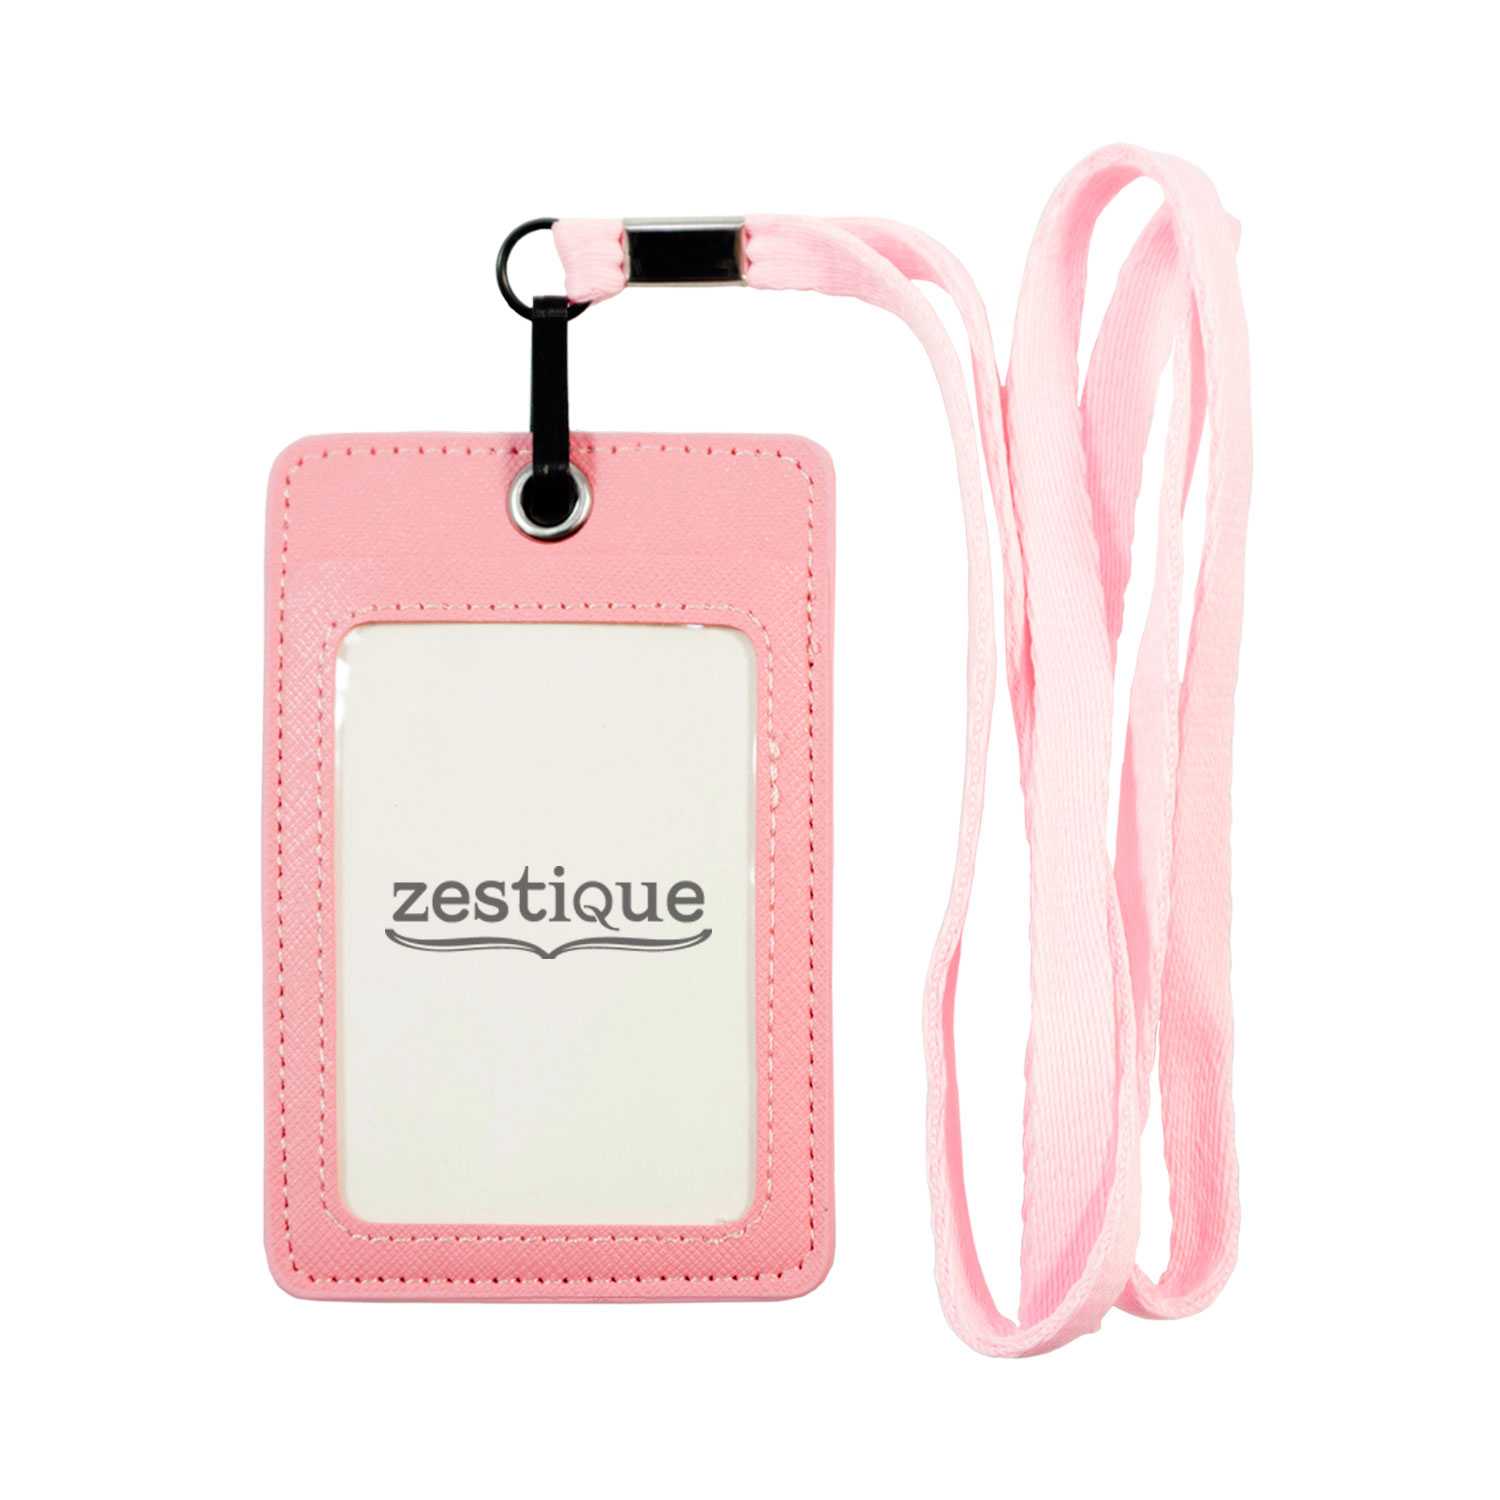 Anteprima, Accessories, Anteprima Id Wallet Bow Polka Dot Lanyard Leather Card  Holder Cute Pink Metalic